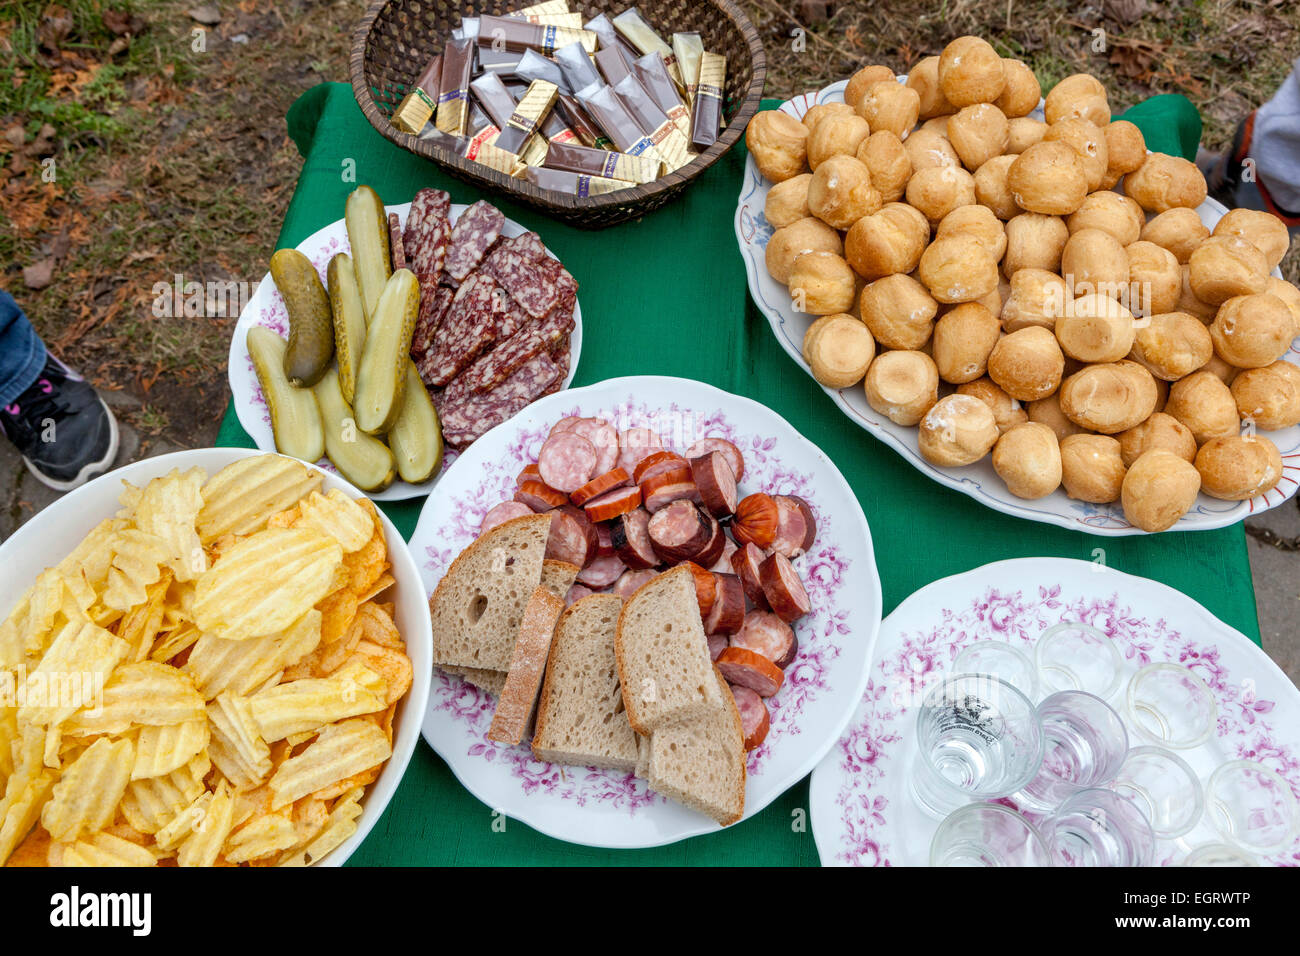 Small refreshments on a table, Czech Republic Stock Photo